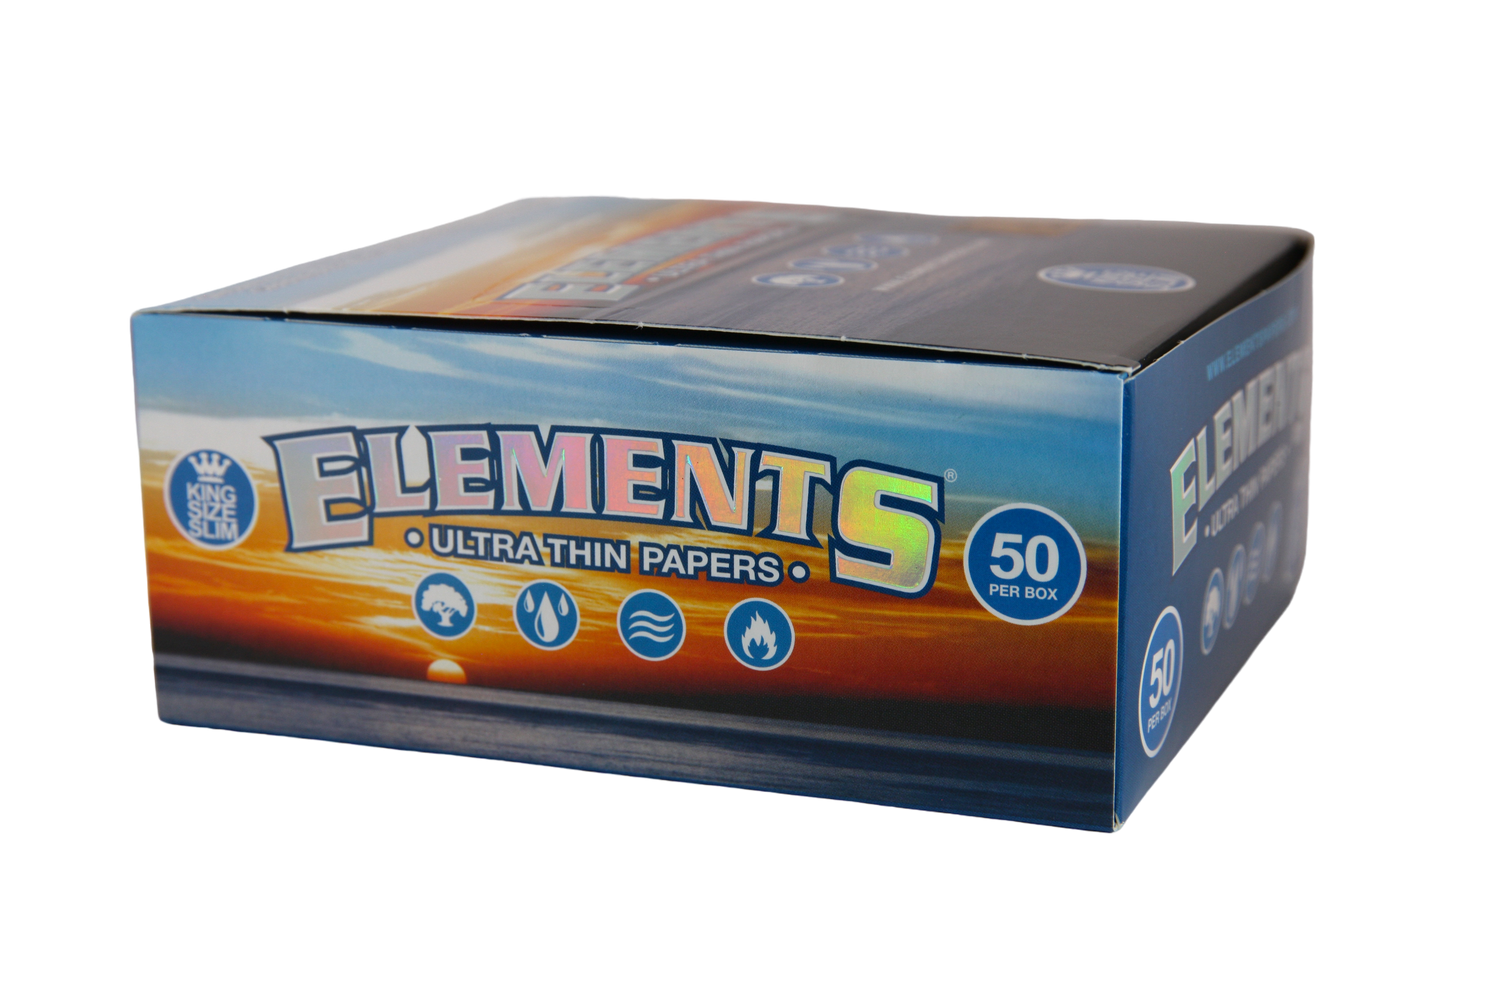 Elements Ultra Thin Rice Papers - King Size Slim / Box of 50